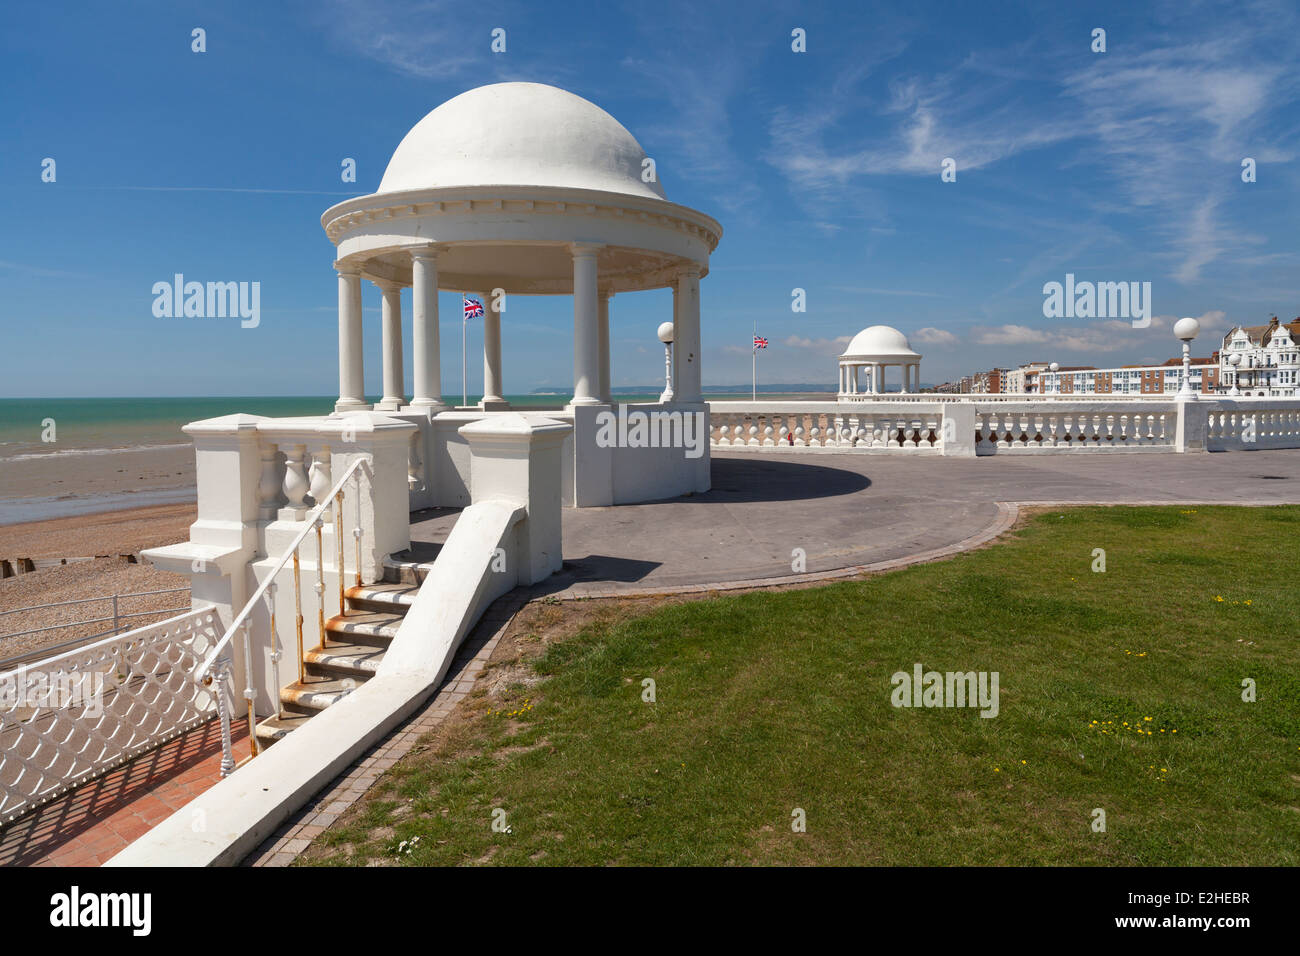 Colonnades at the De la Warr Pavilion, Bexhill-on-Sea, East Sussex, England, United Kingdom, Europe Stock Photo